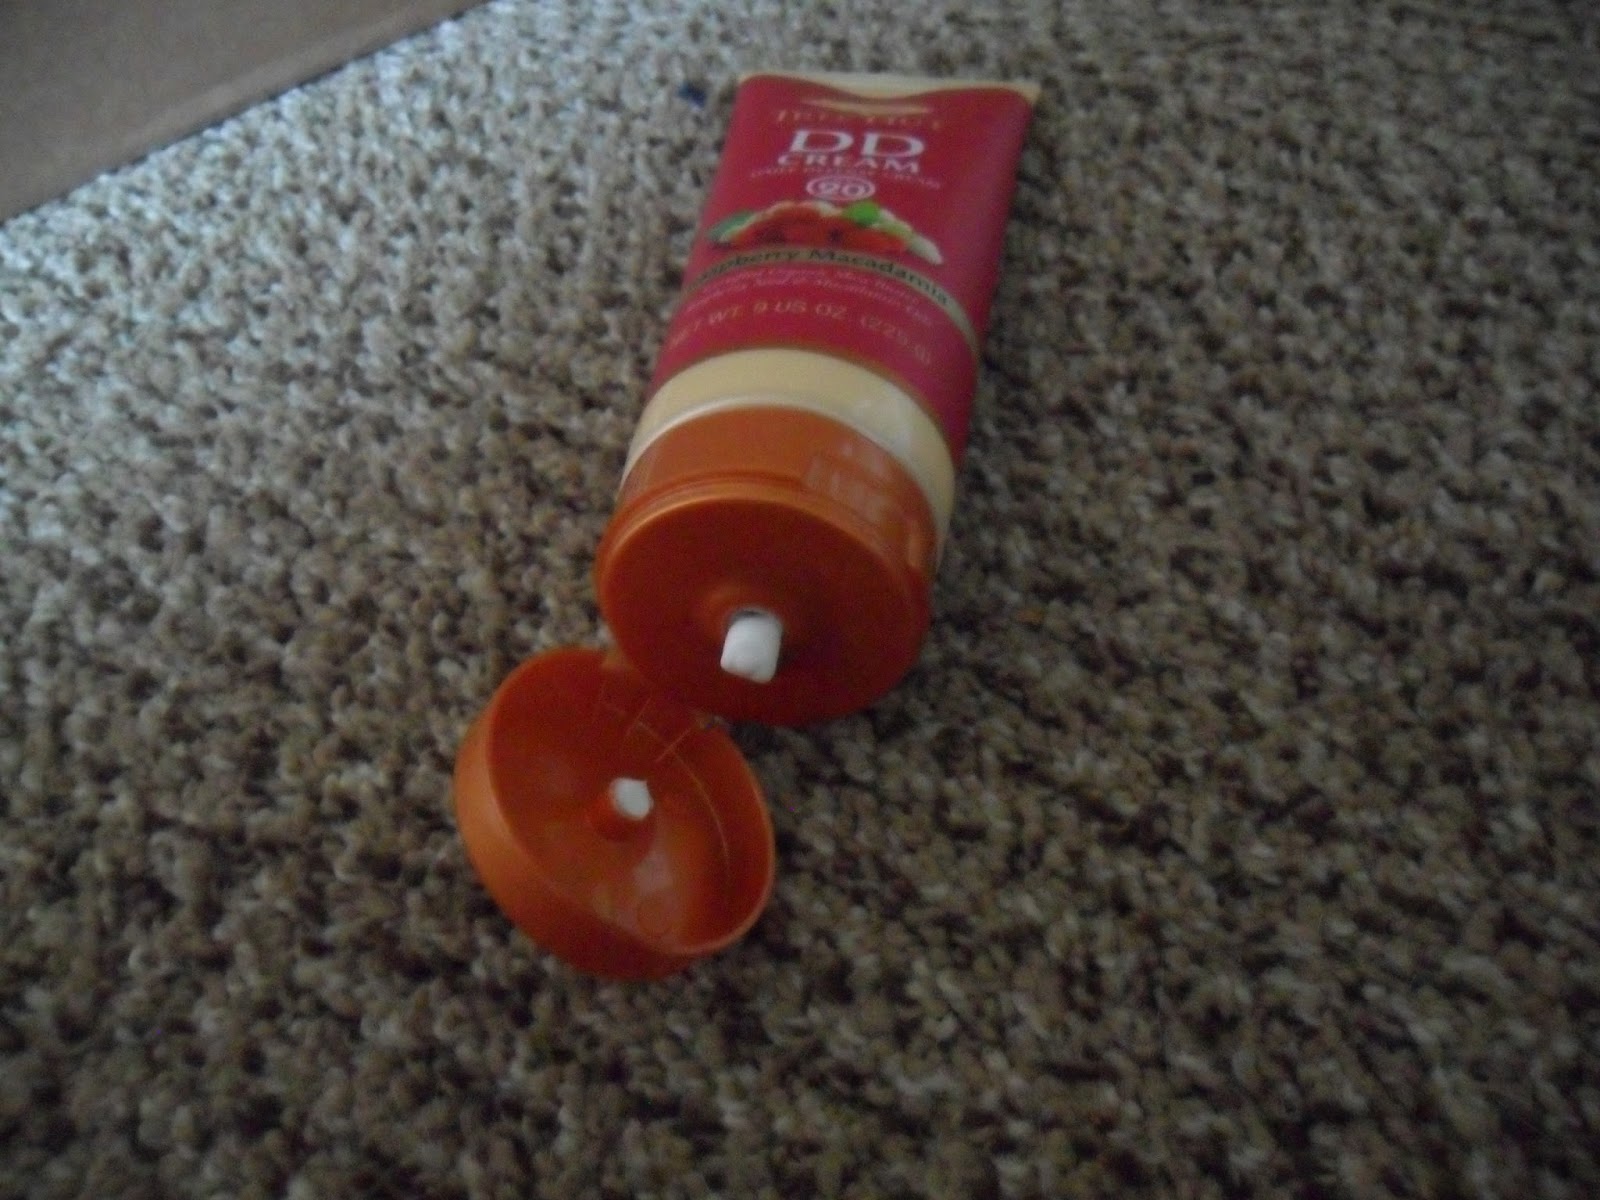 Tree Hut Daily Defense Raspberry Macadamia: Dry Oil Myst and Body Lotion Review.